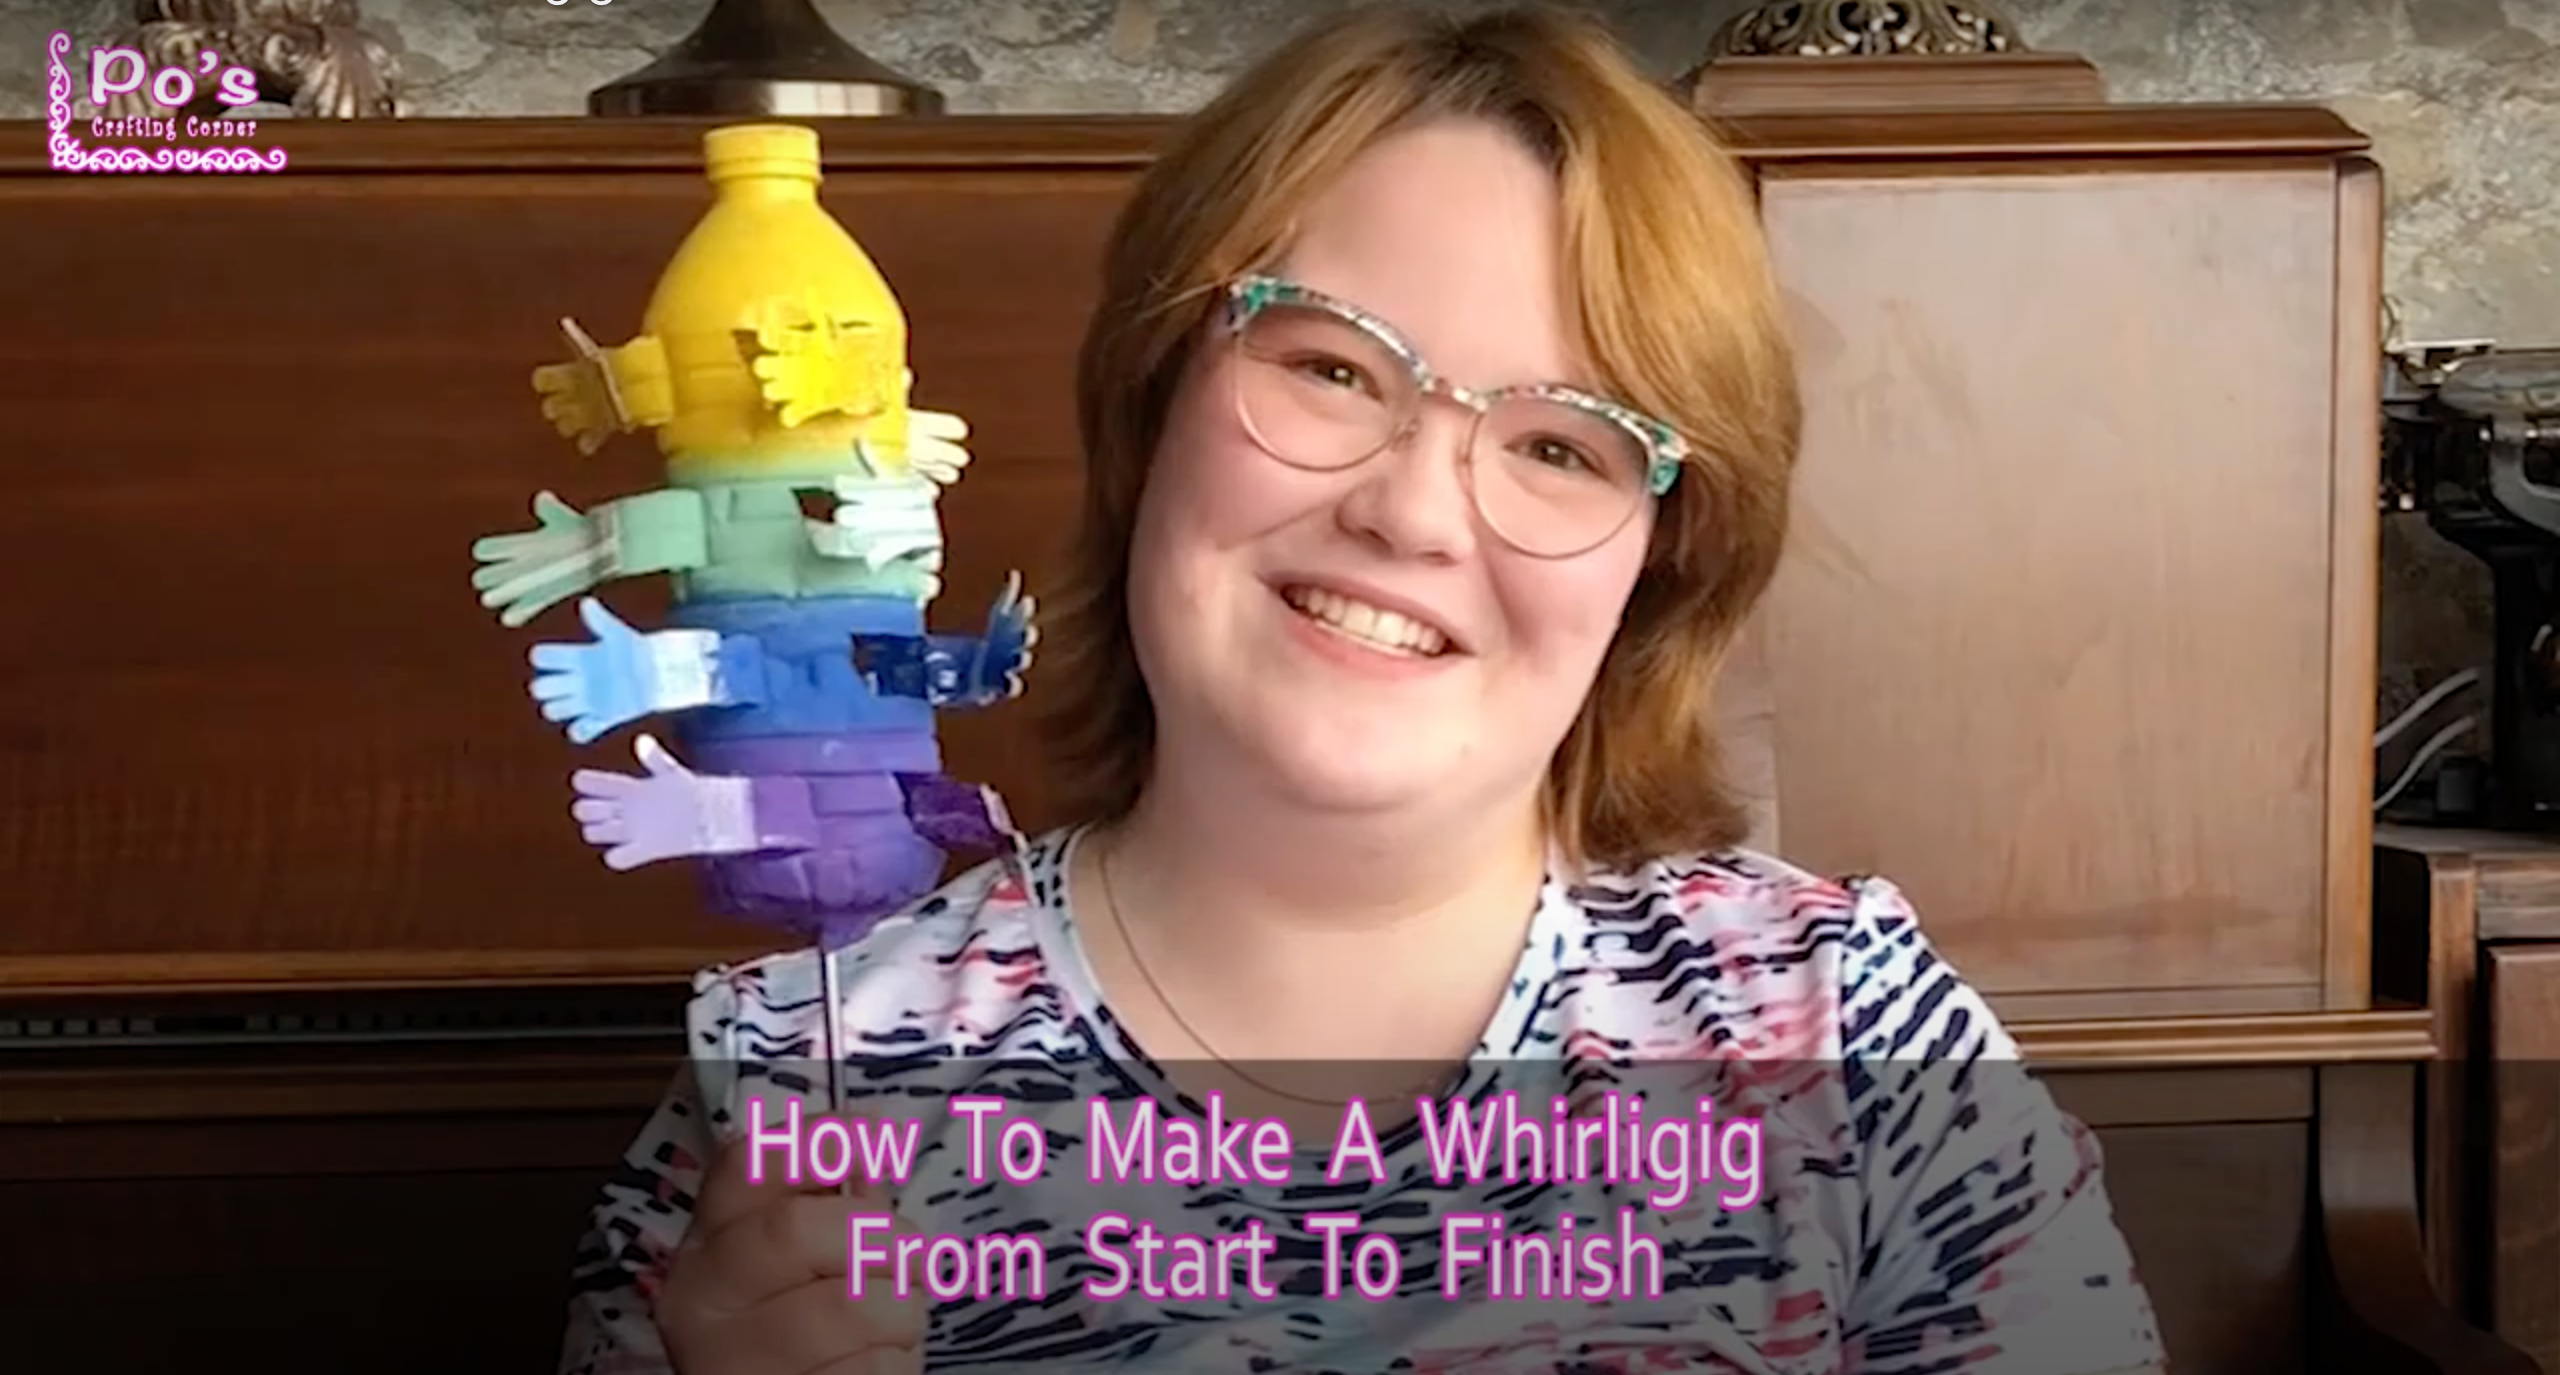 How To Make A Whirligig From Start to Finish